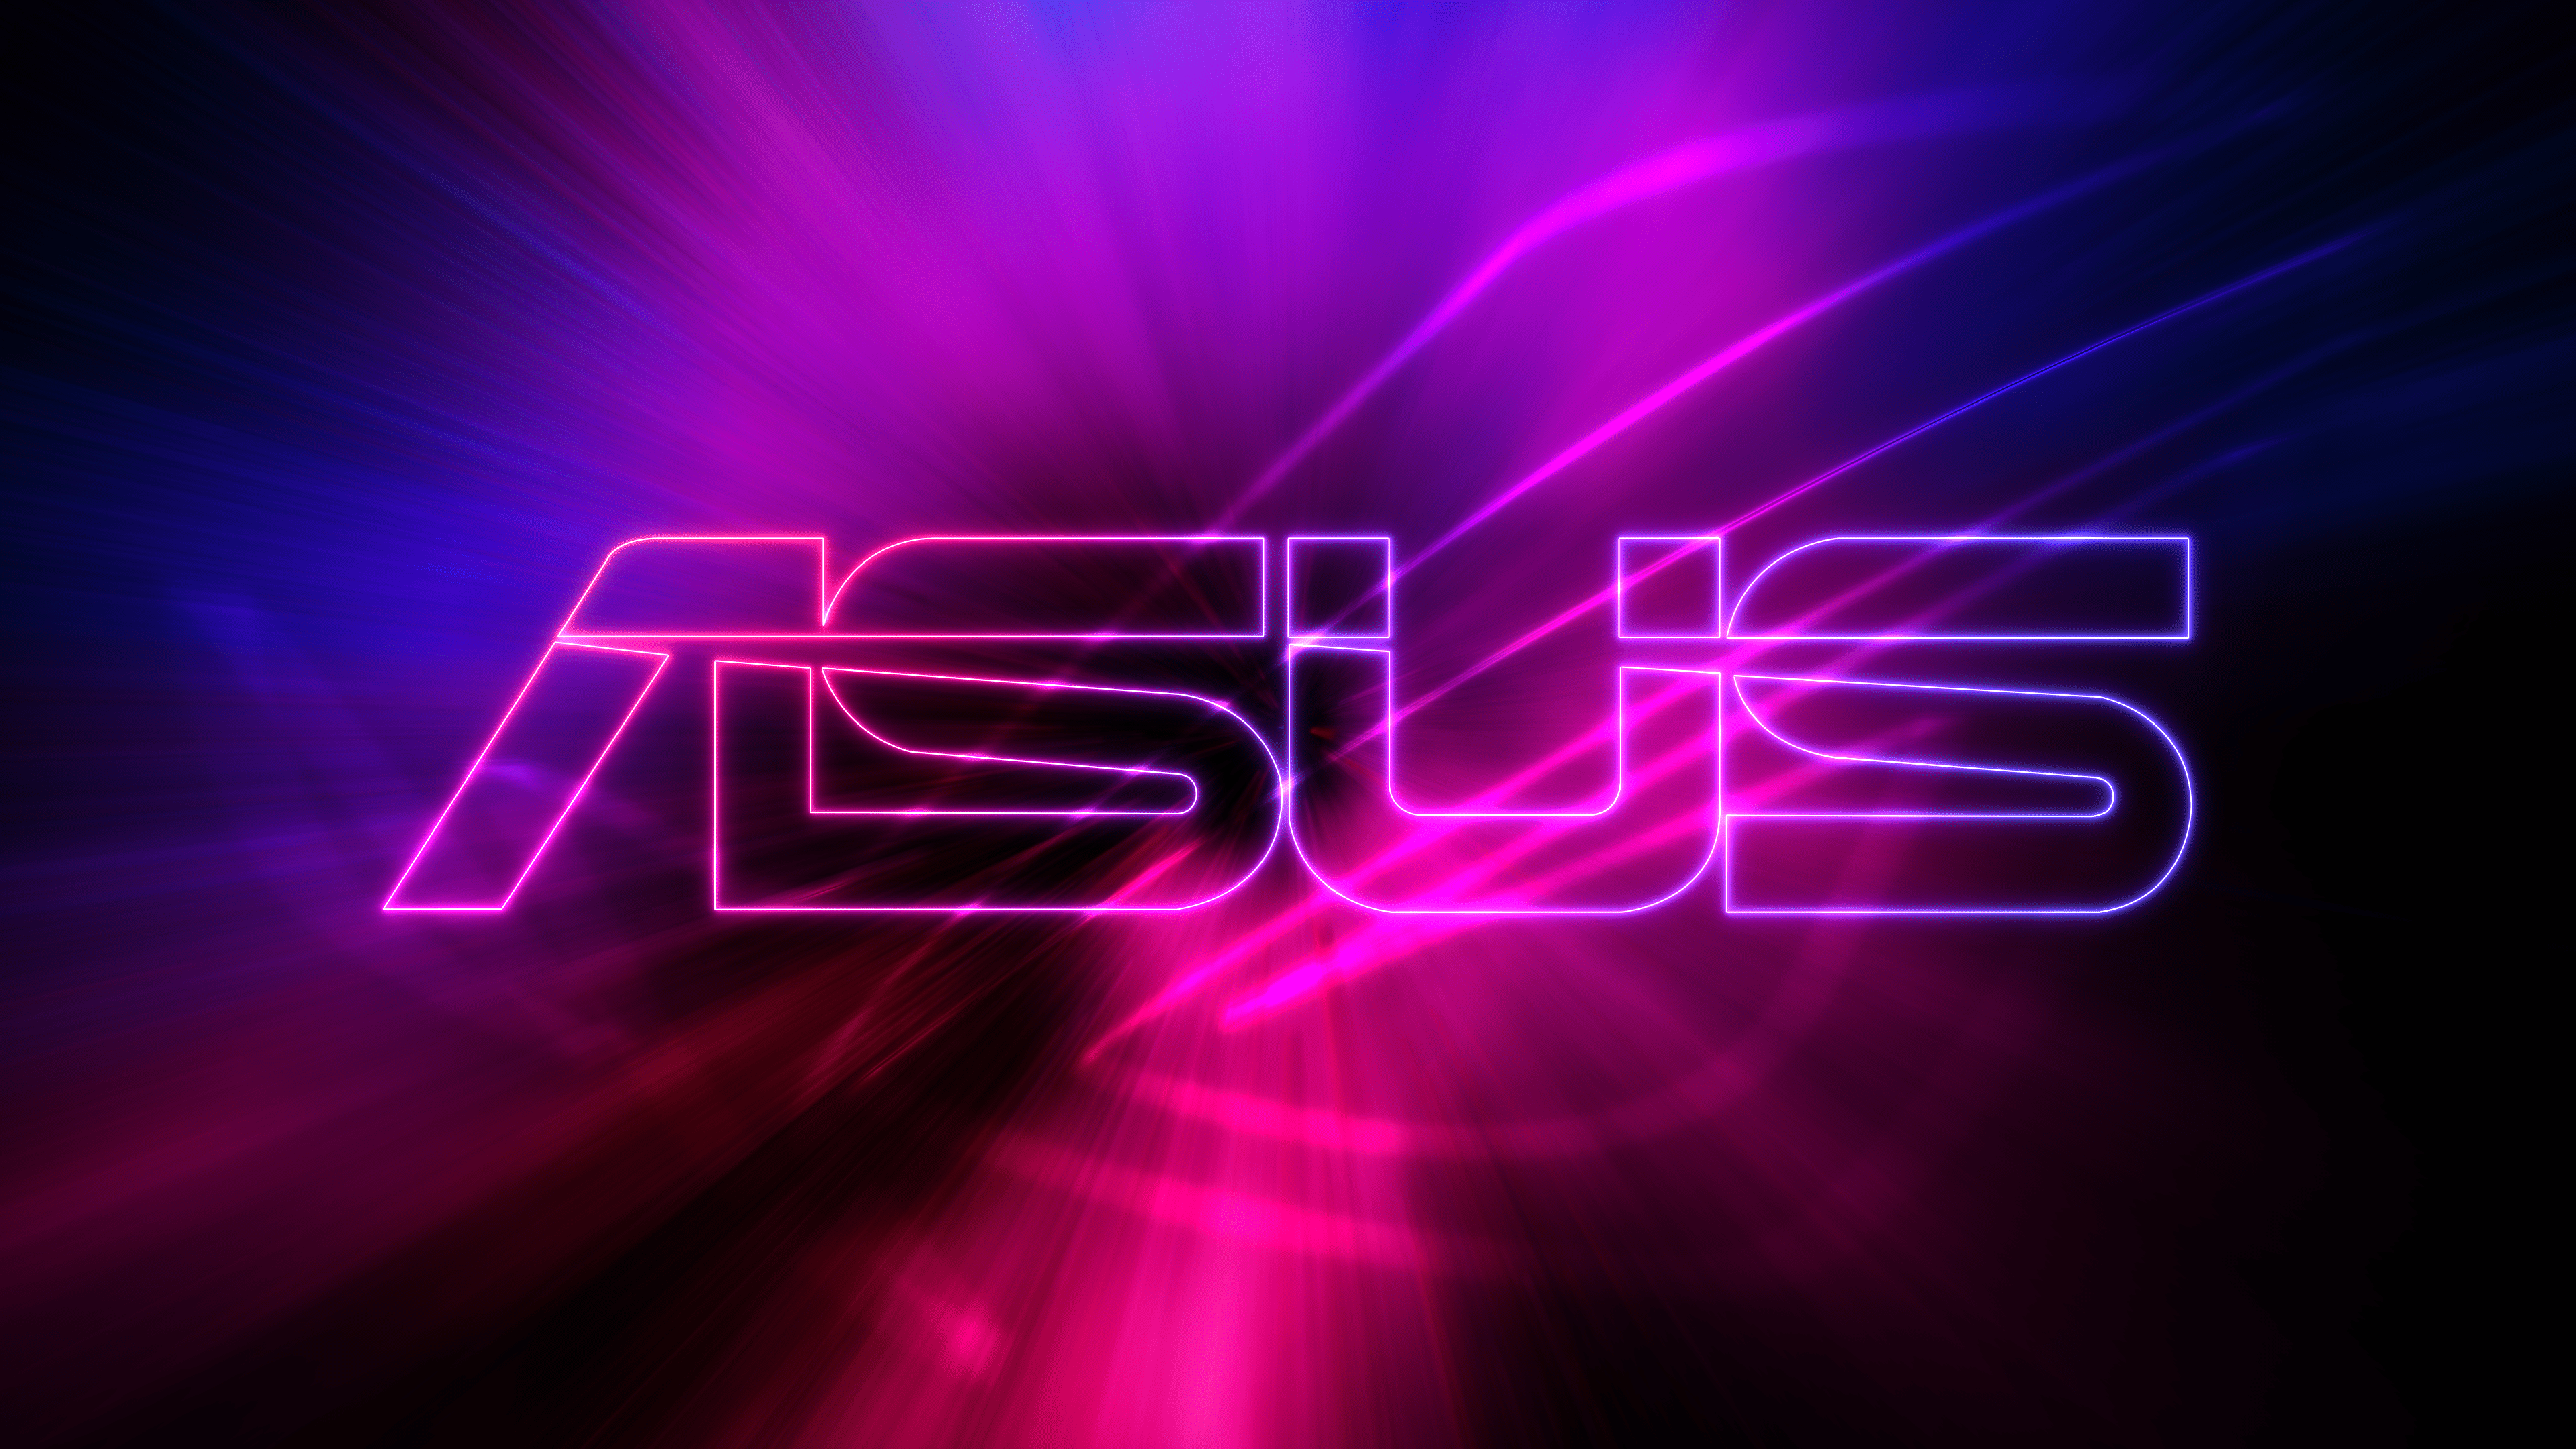 Asus Tuf Wallpapers Top Free Asus Tuf Backgrounds Wallpaperaccess